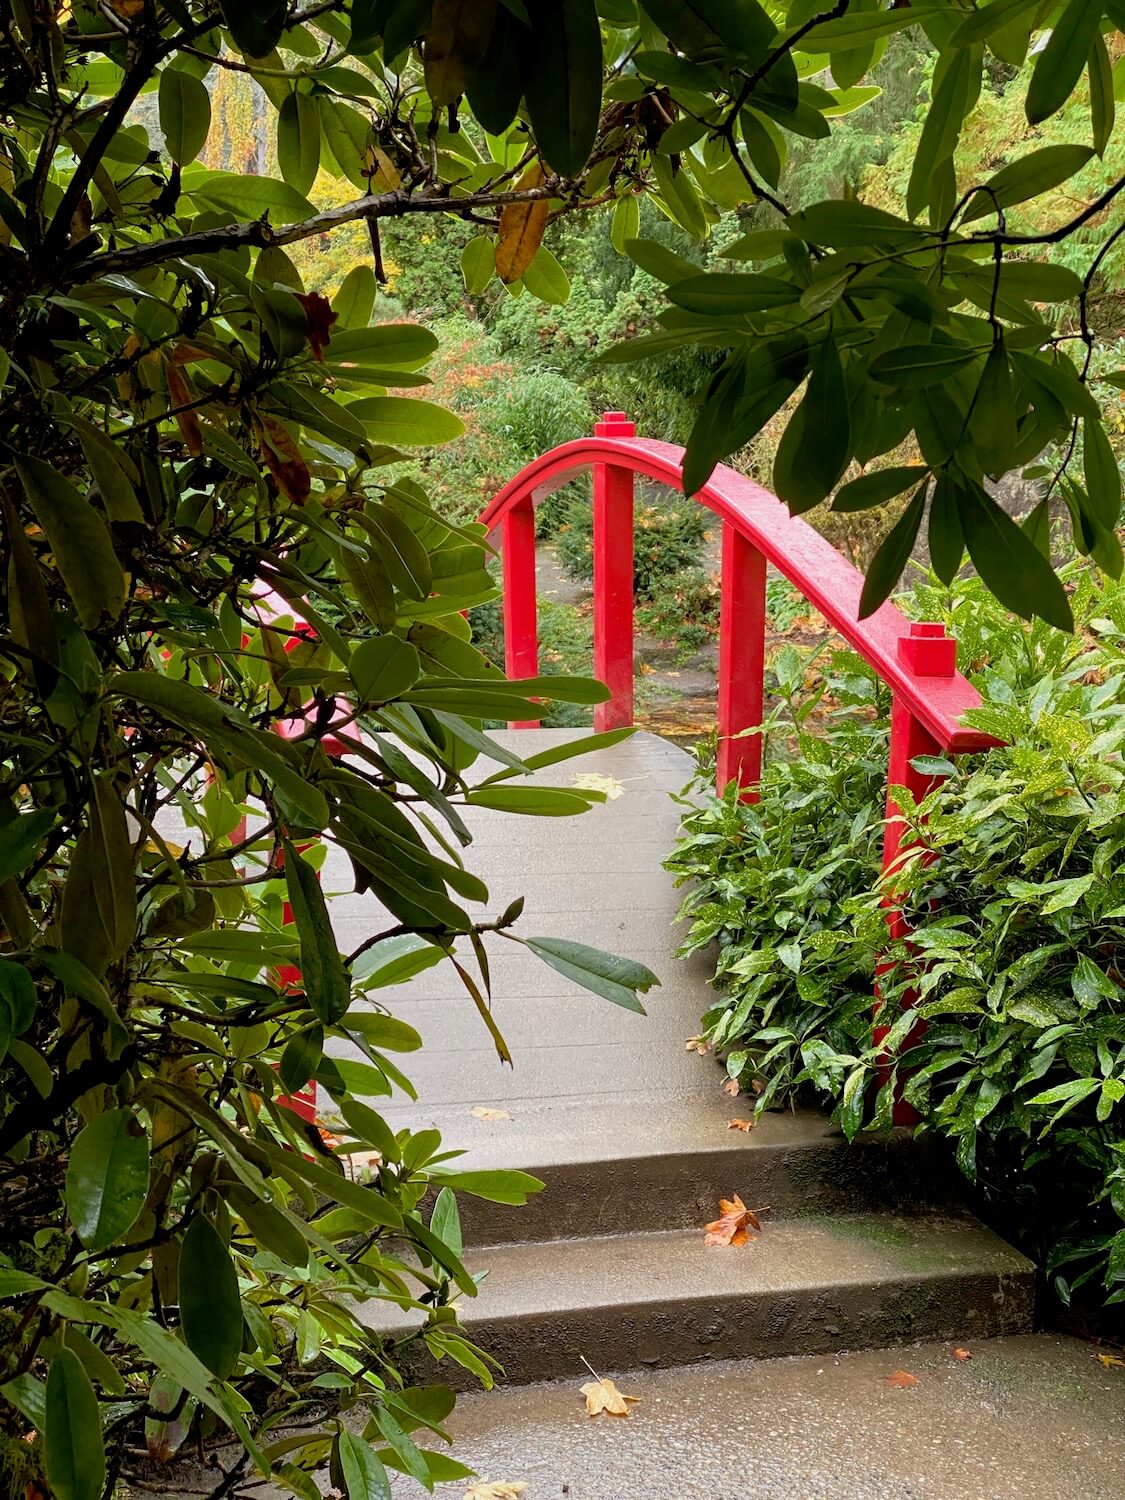 Kubota garden offers a splash of color in the middle of winter in Seattle and can be a great outdoor thing to do to connect with nature.  The red bridge is seen from a thicket of lime green rhododendron leaves.